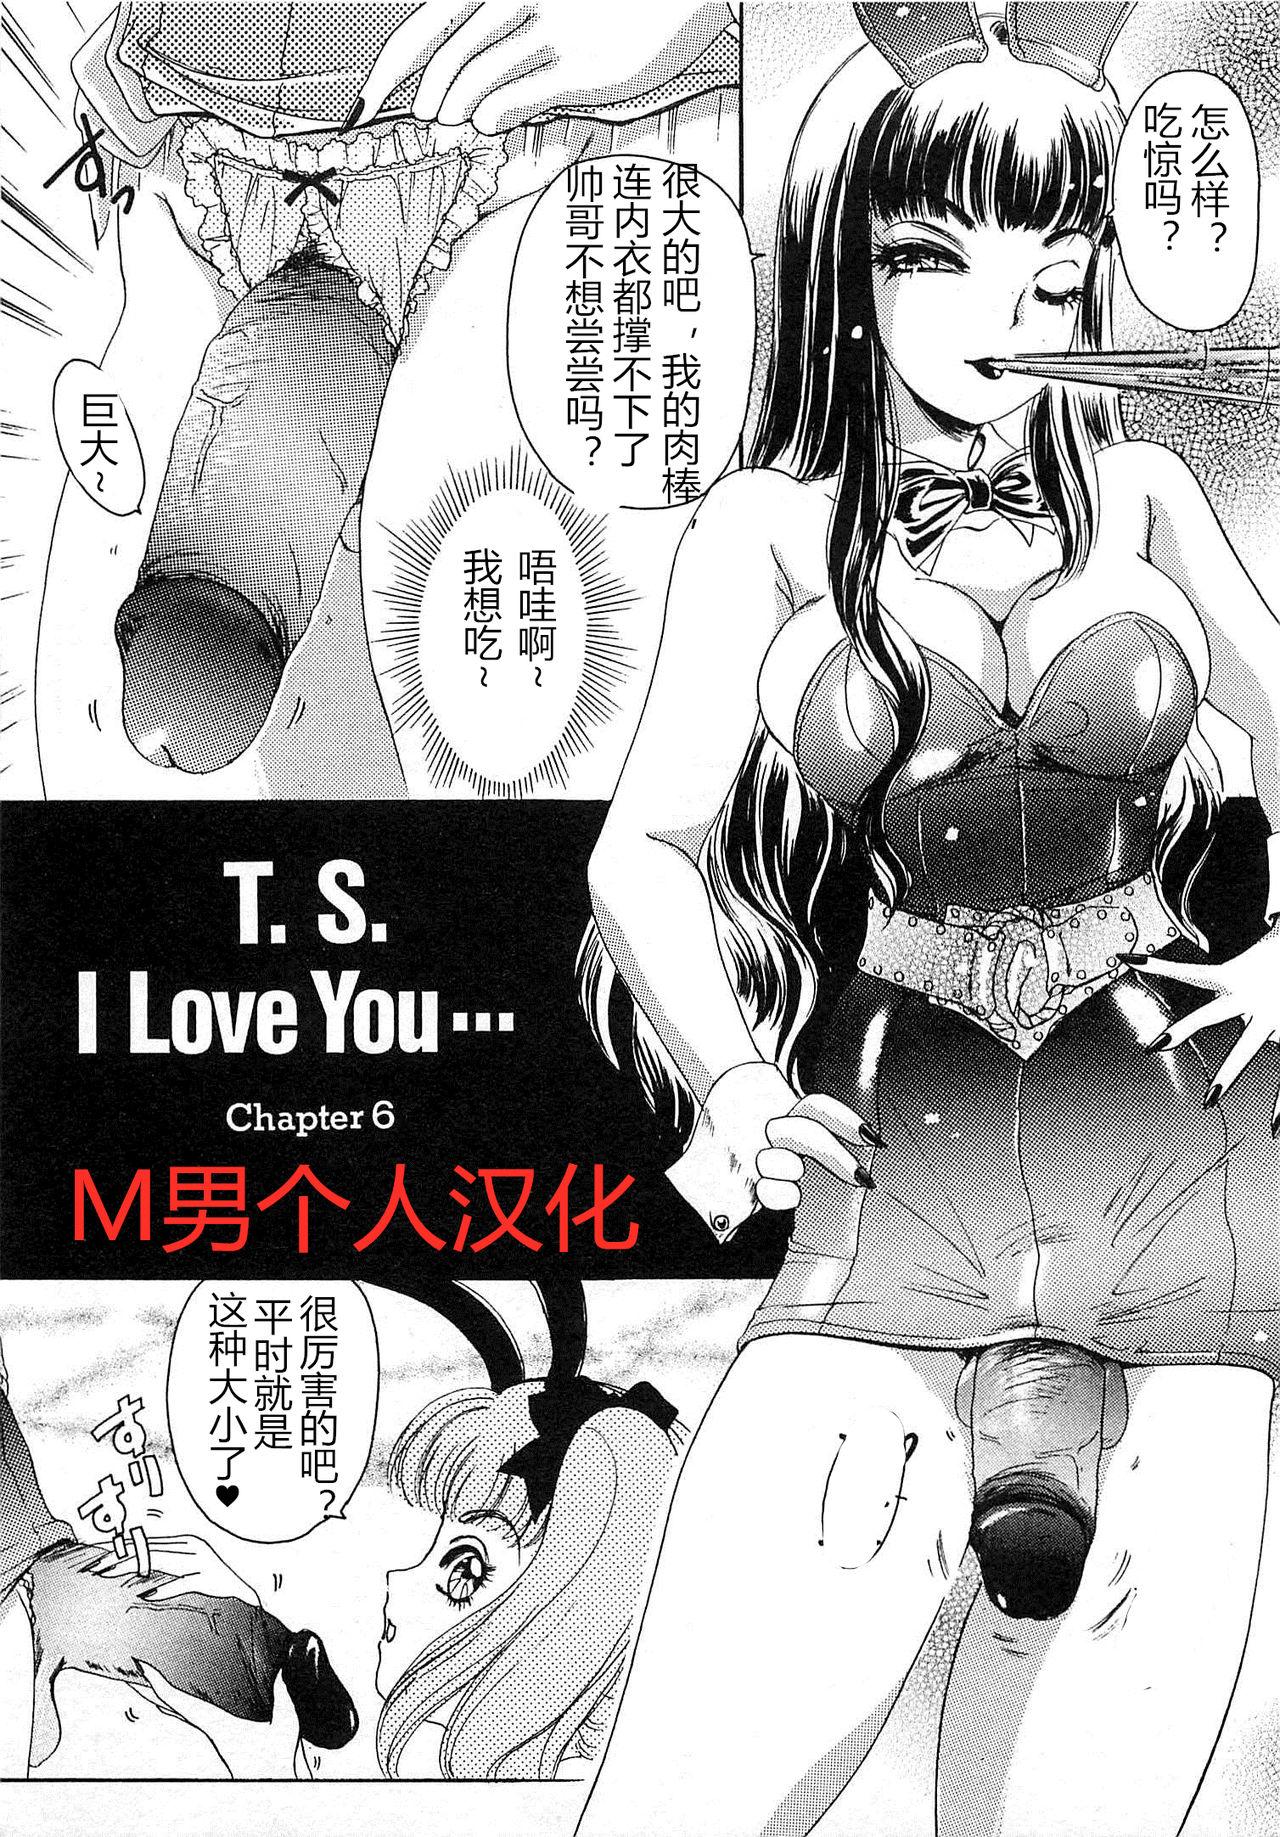 T.S. I LOVE YOU chapter 06 0